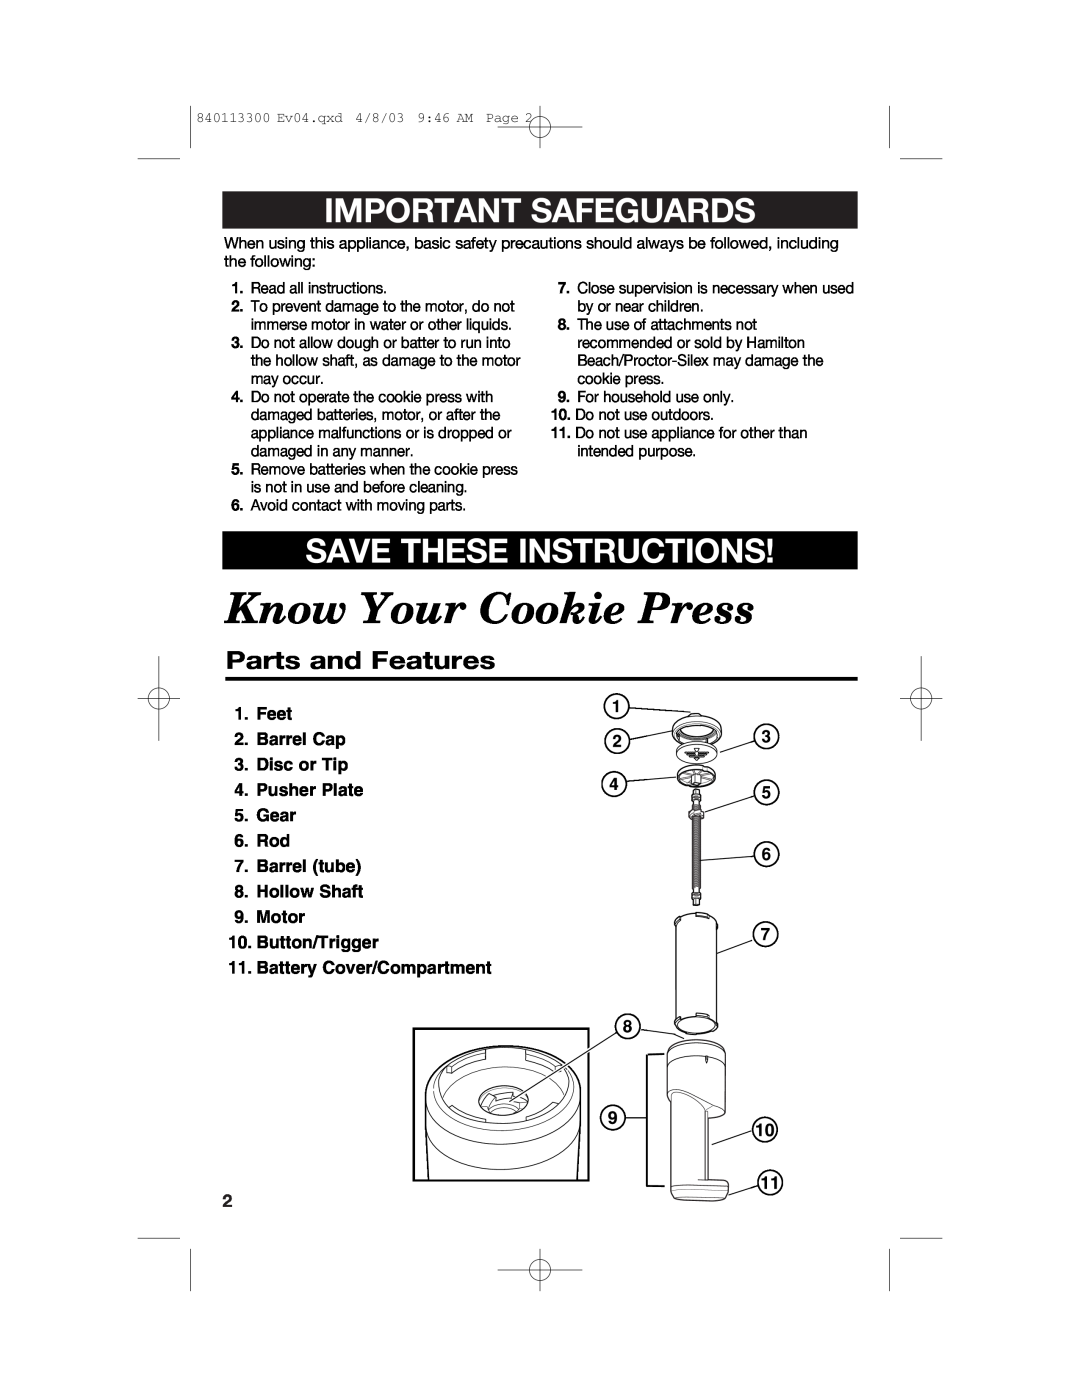 Hamilton Beach 840113300 Know Your Cookie Press, Important Safeguards, Save These Instructions, Parts and Features 